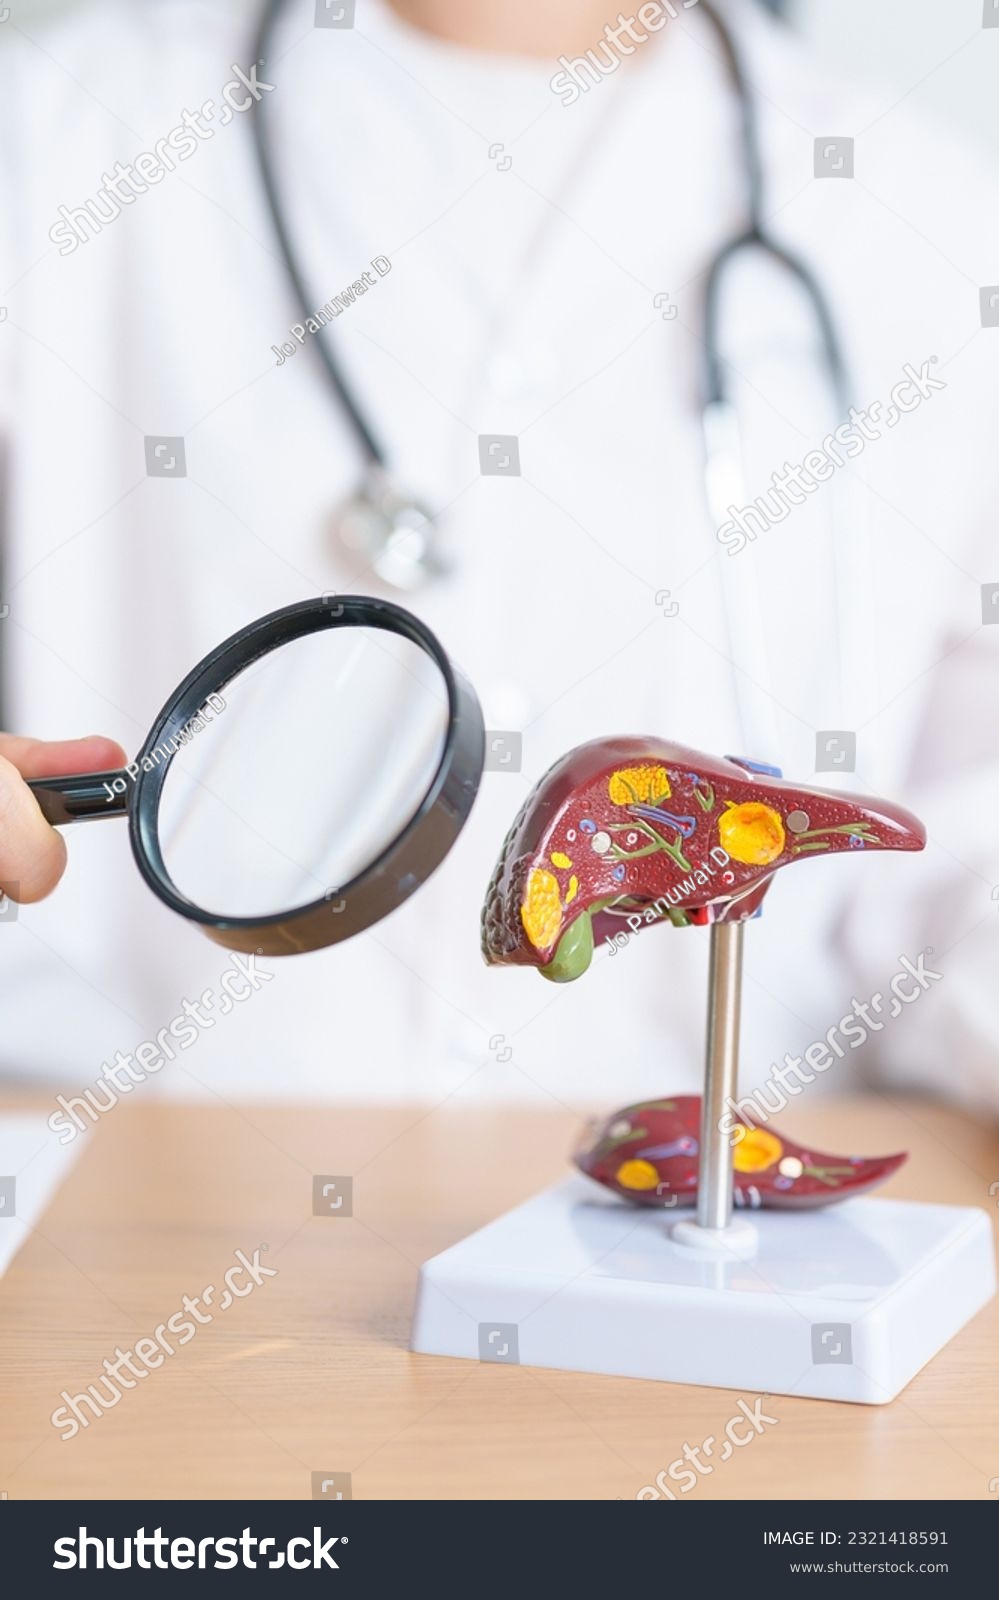 Doctor with human Liver model and Magnifying glass. Liver cancer and Tumor, Jaundice, Viral Hepatitis A, B, C, D, E, Cirrhosis, Failure, Enlarged, Hepatic Encephalopathy and Ascites Fluid in Belly #2321418591